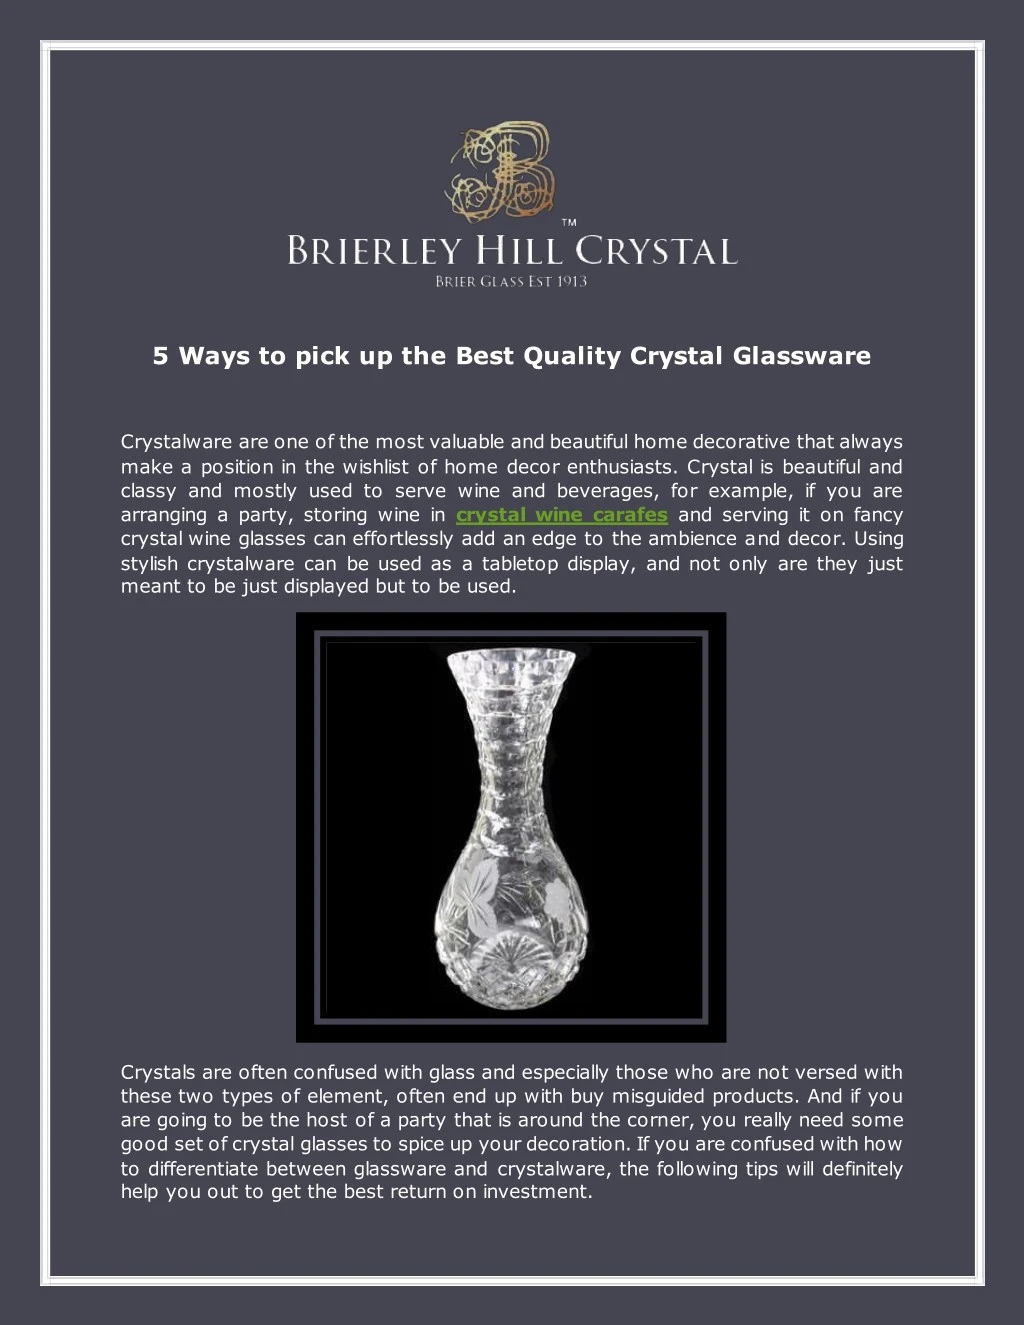 5 ways to pick up the best quality crystal